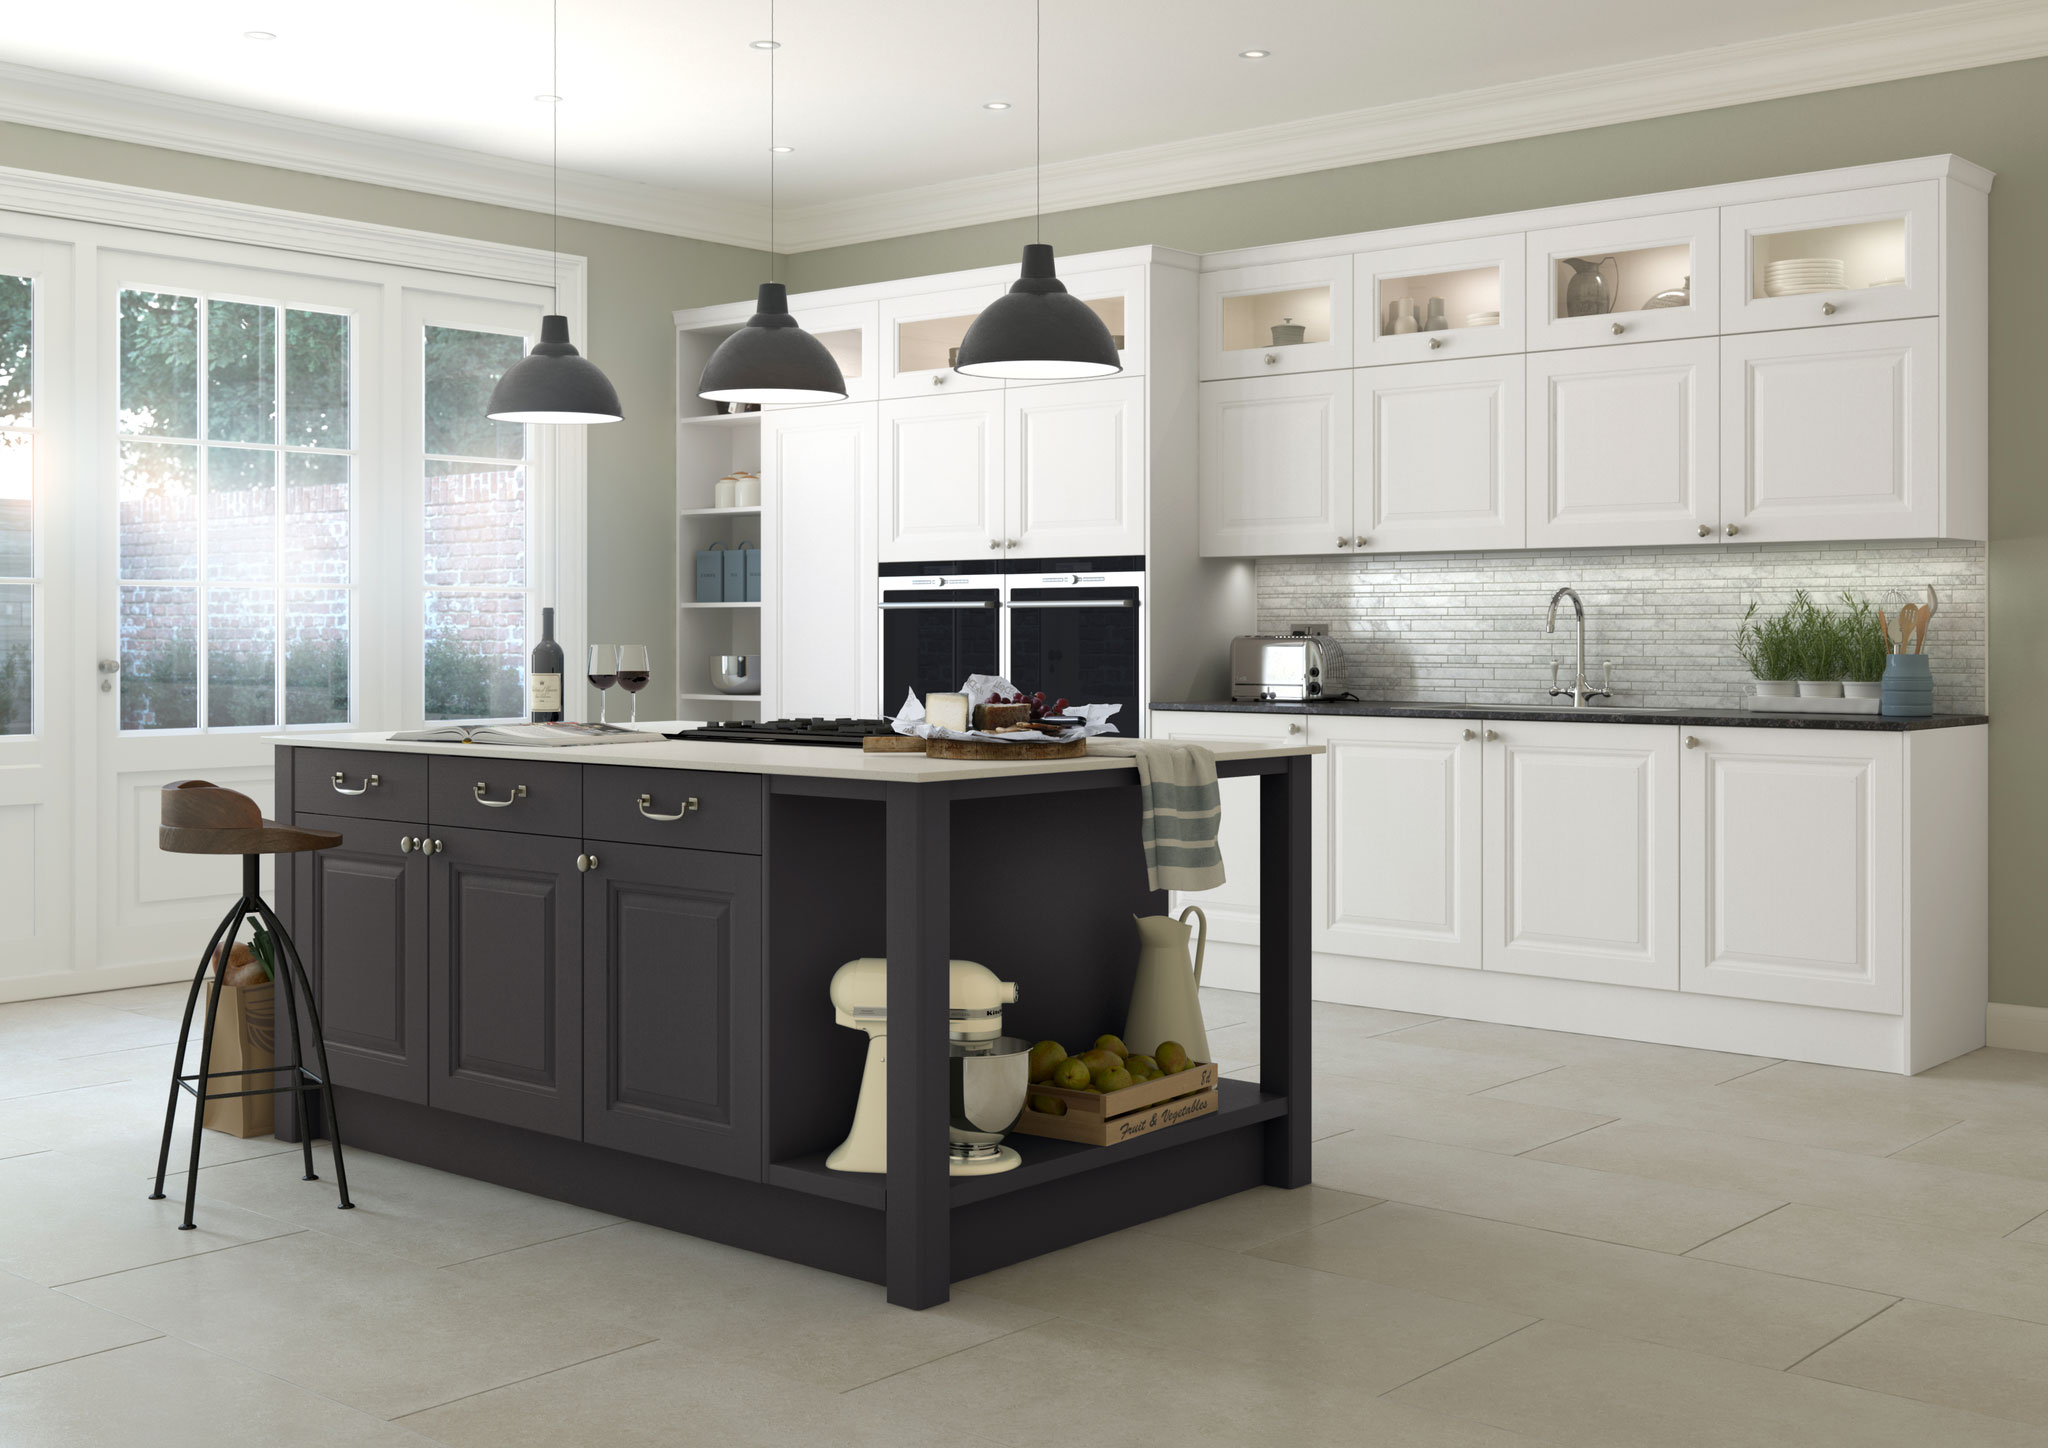 Town & Country Kitchens